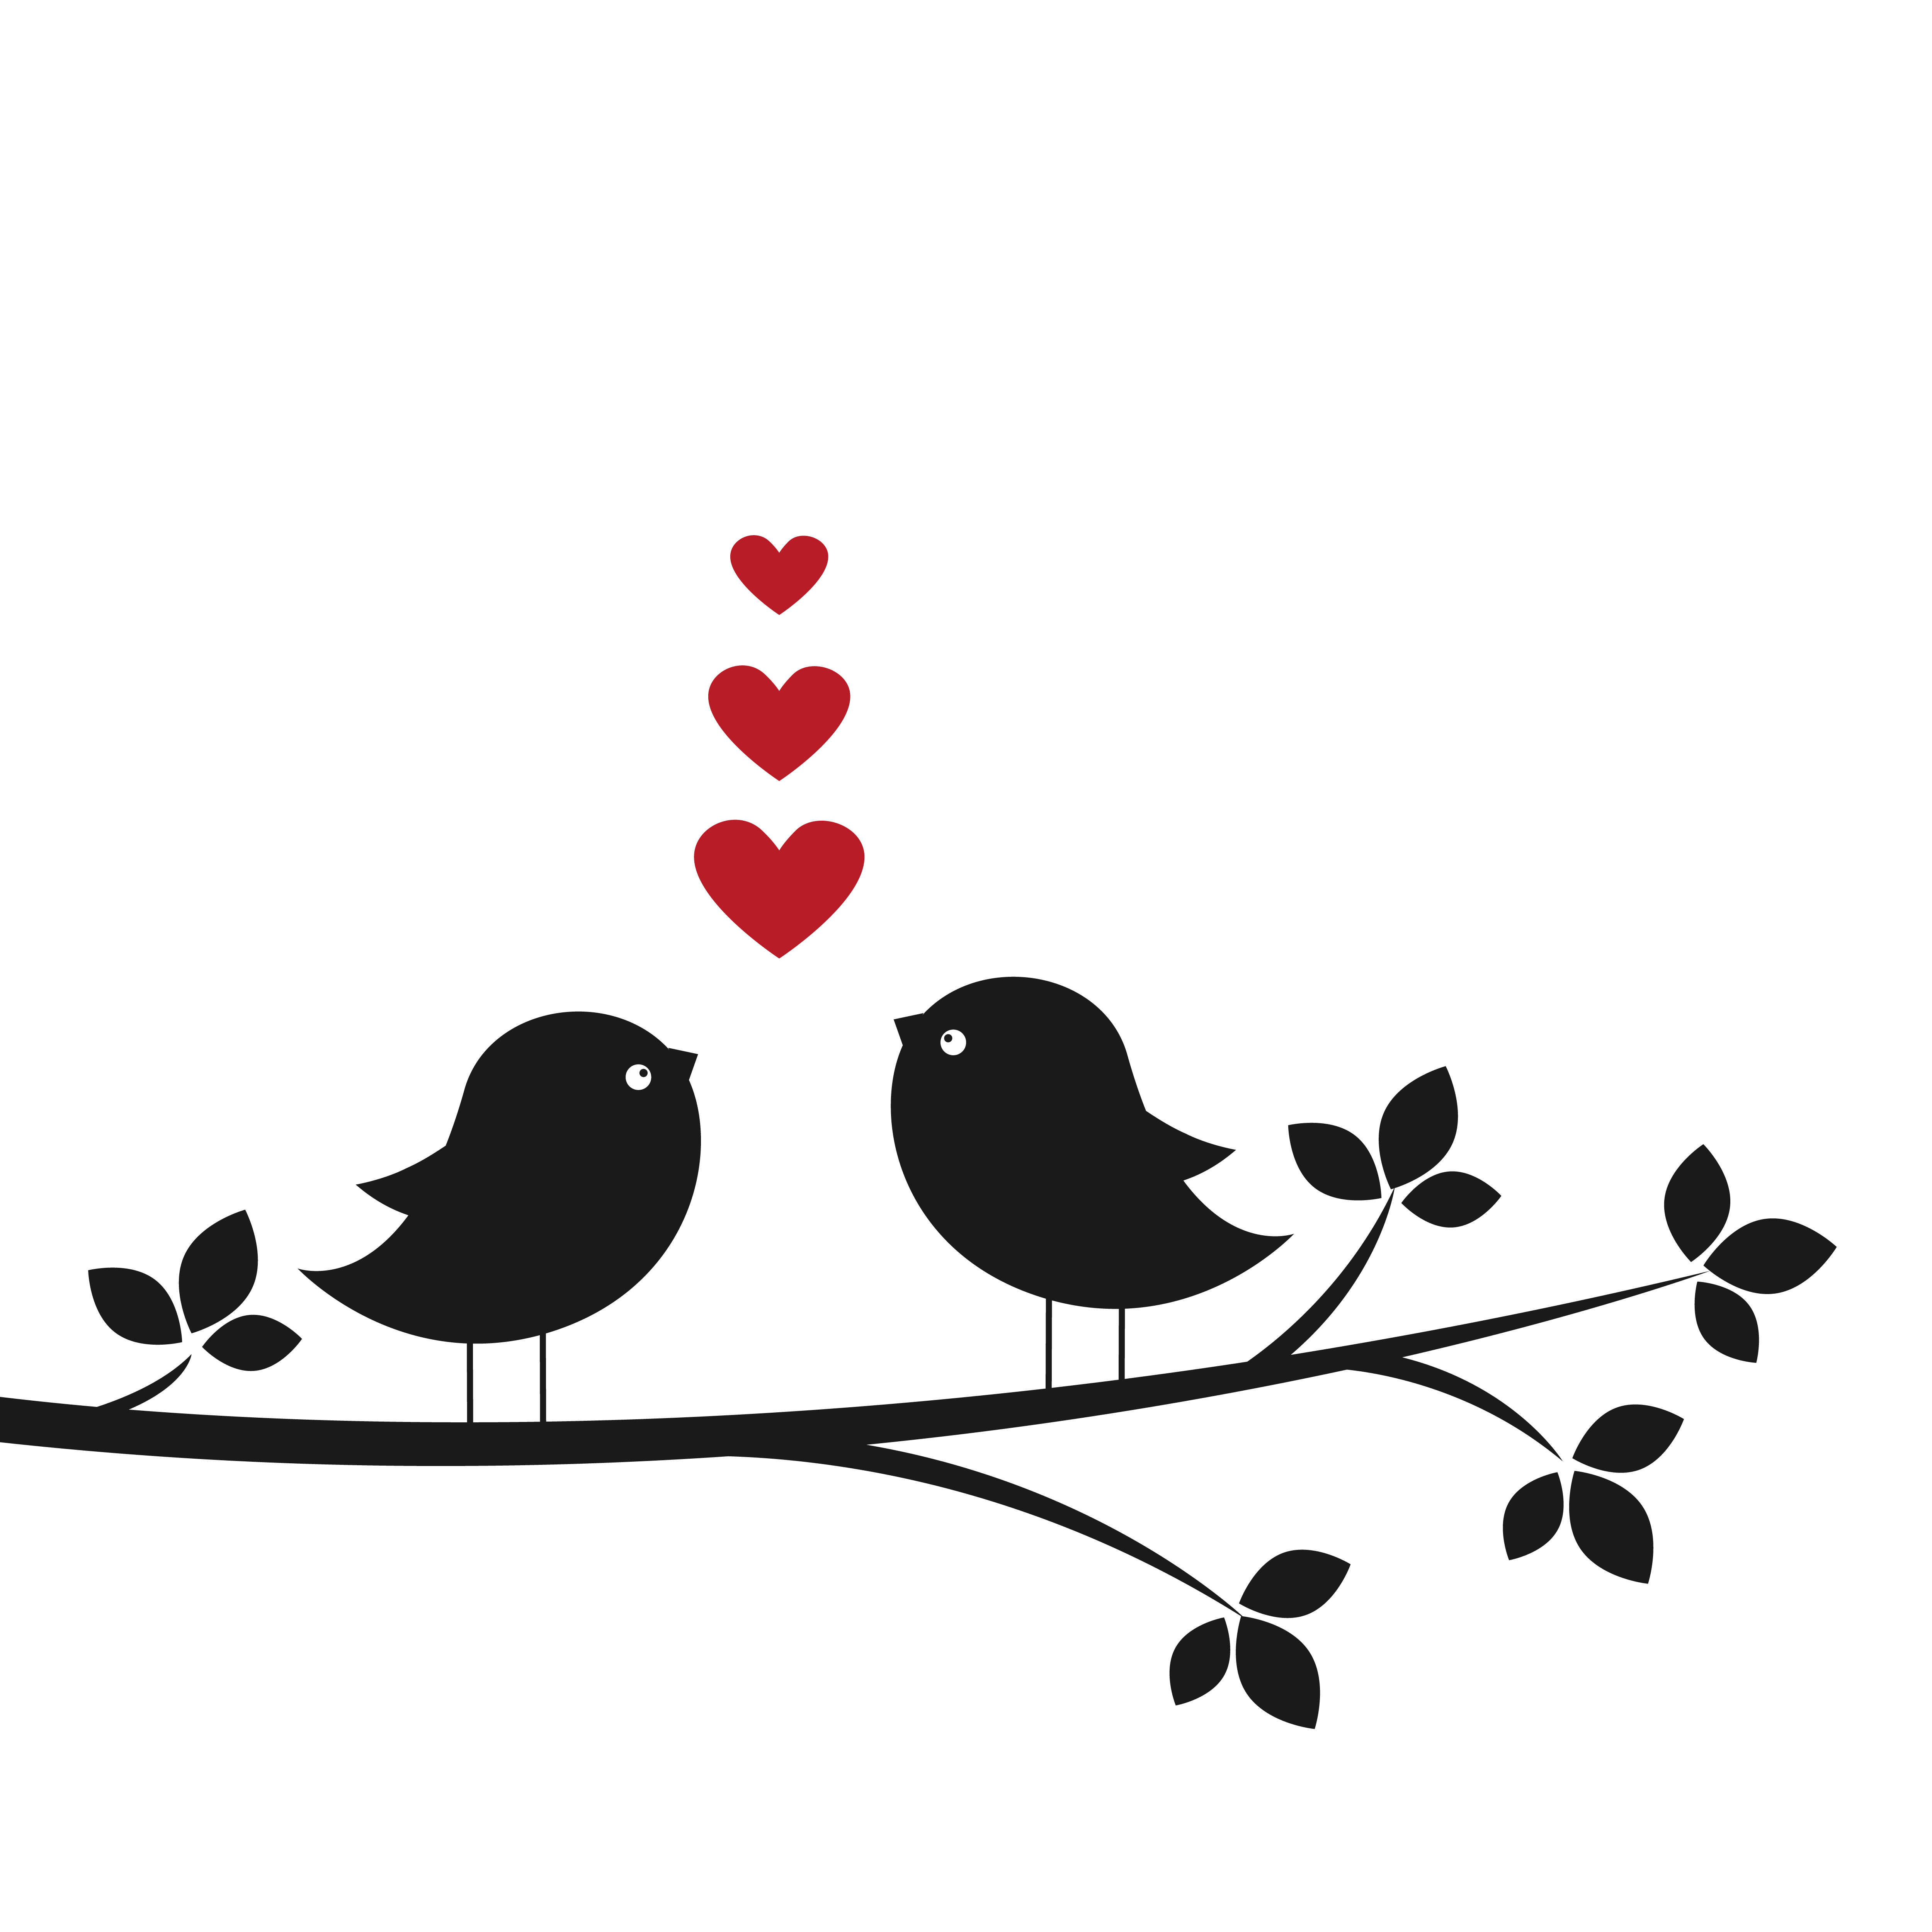 Download Silhouettes cute birds in Love - Download Free Vectors, Clipart Graphics & Vector Art